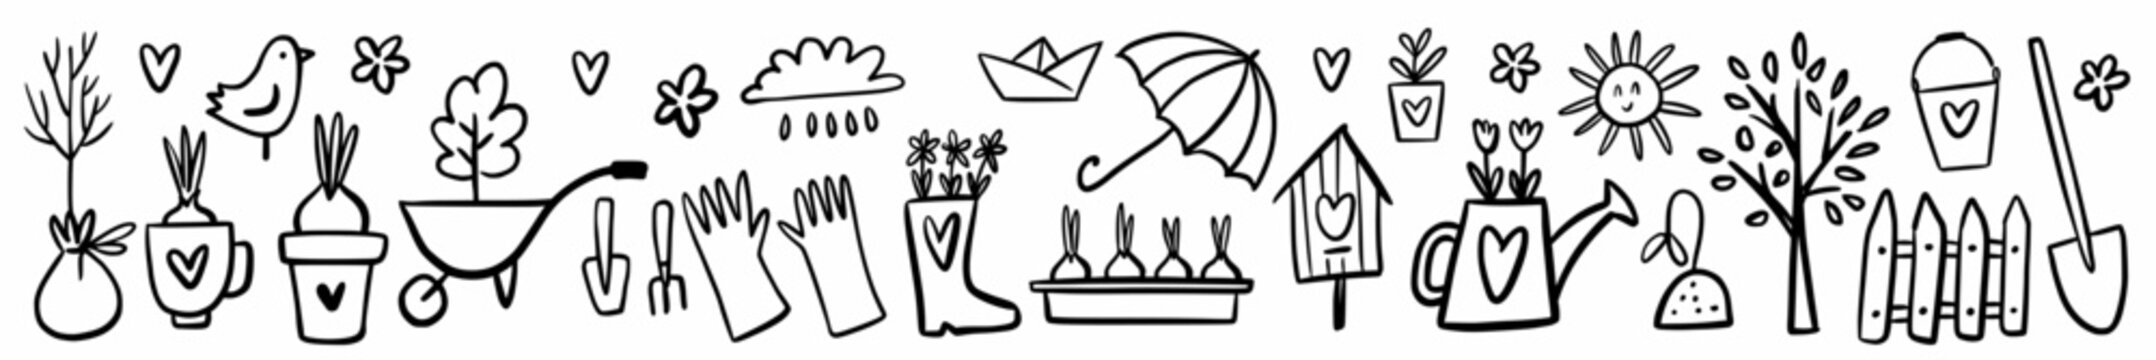 Vector horizontal pattern of gardening elements and spring symbols, hand-drawn in doodle style